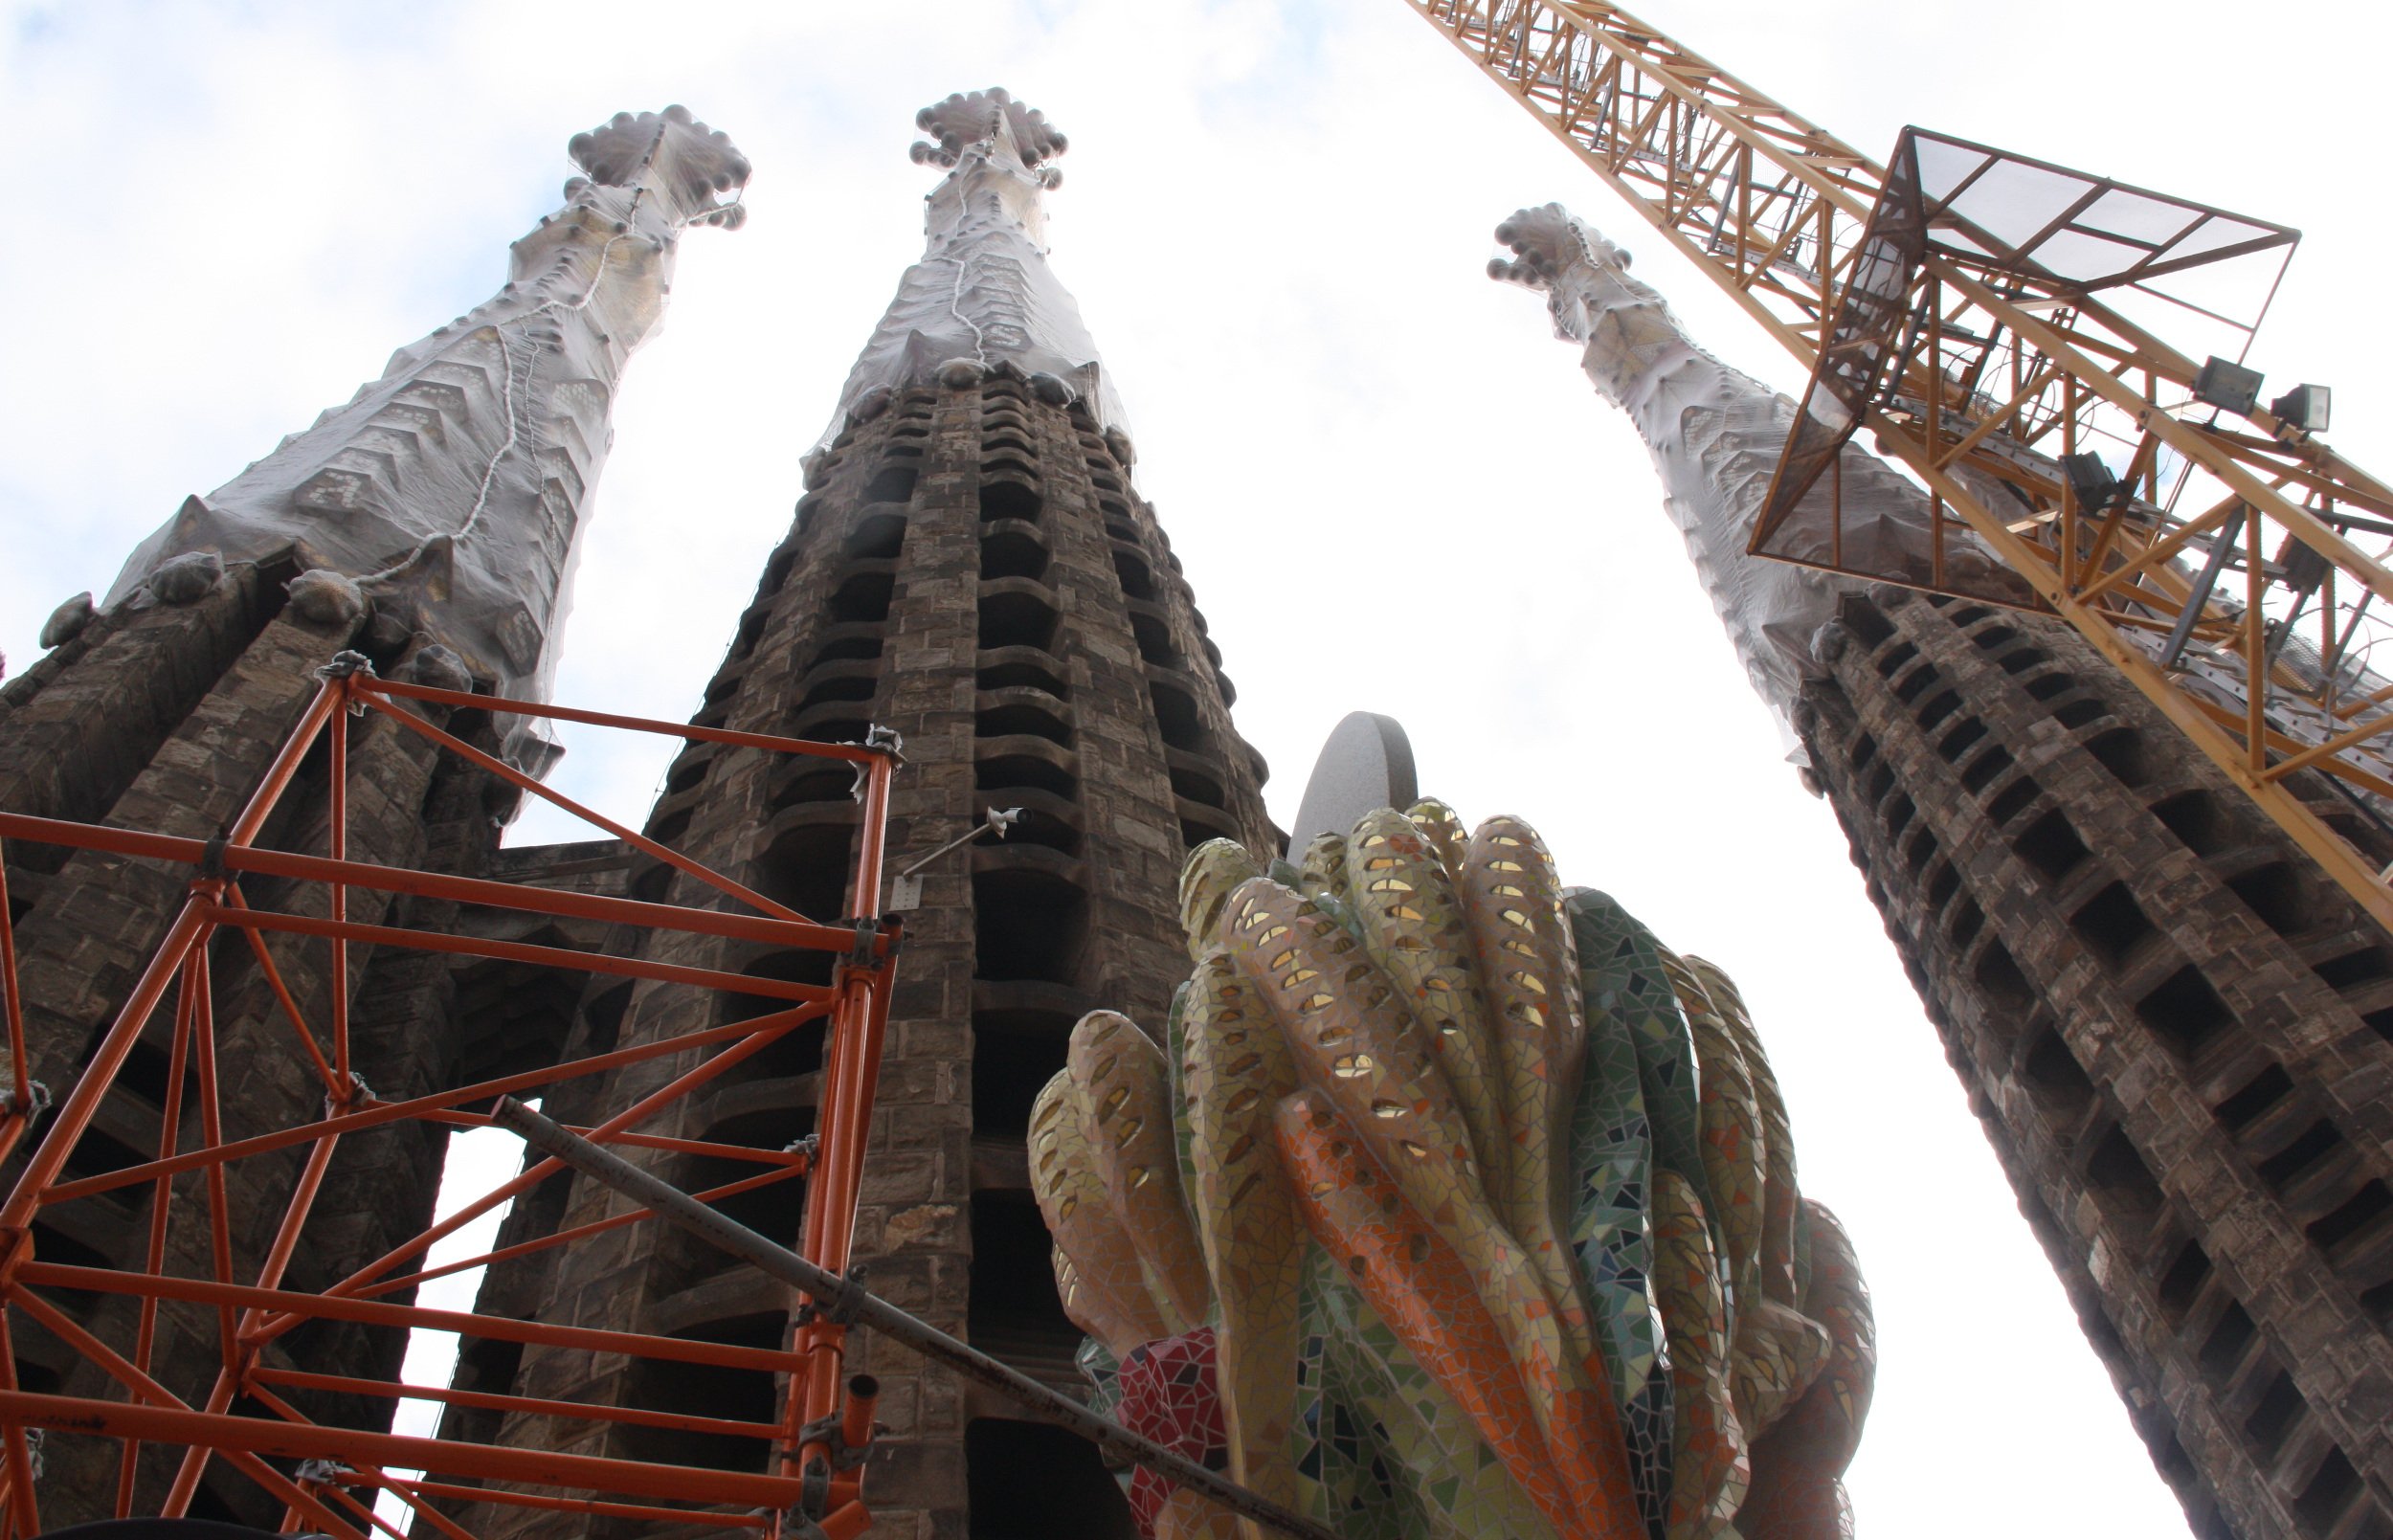 The Sagrada Familia finally has building permission after 130 years